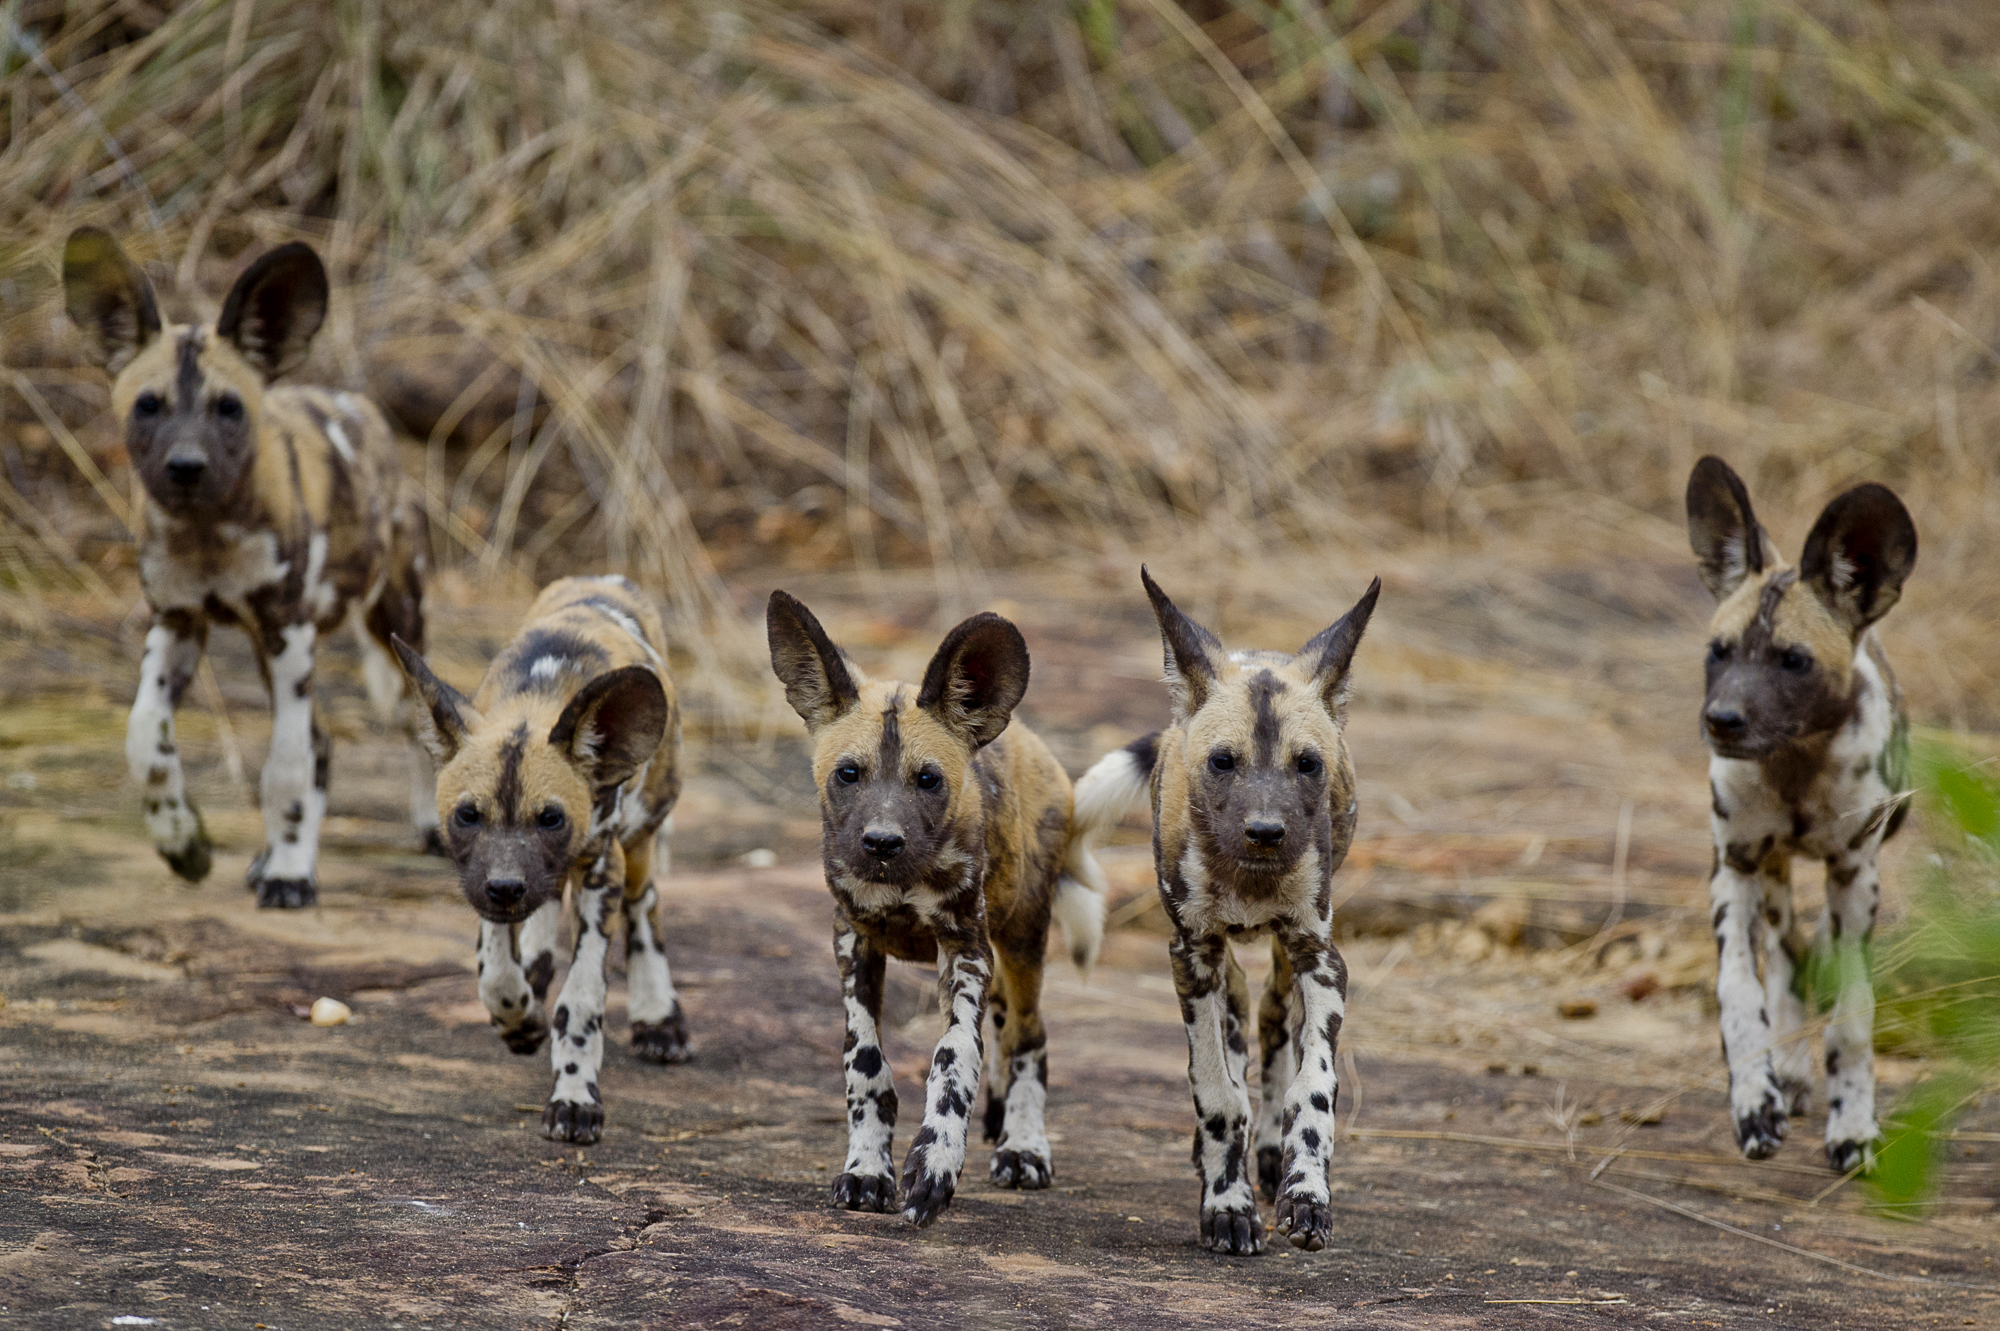 A pack of wild dog in Nyerere National Park - rare Africa safari animals